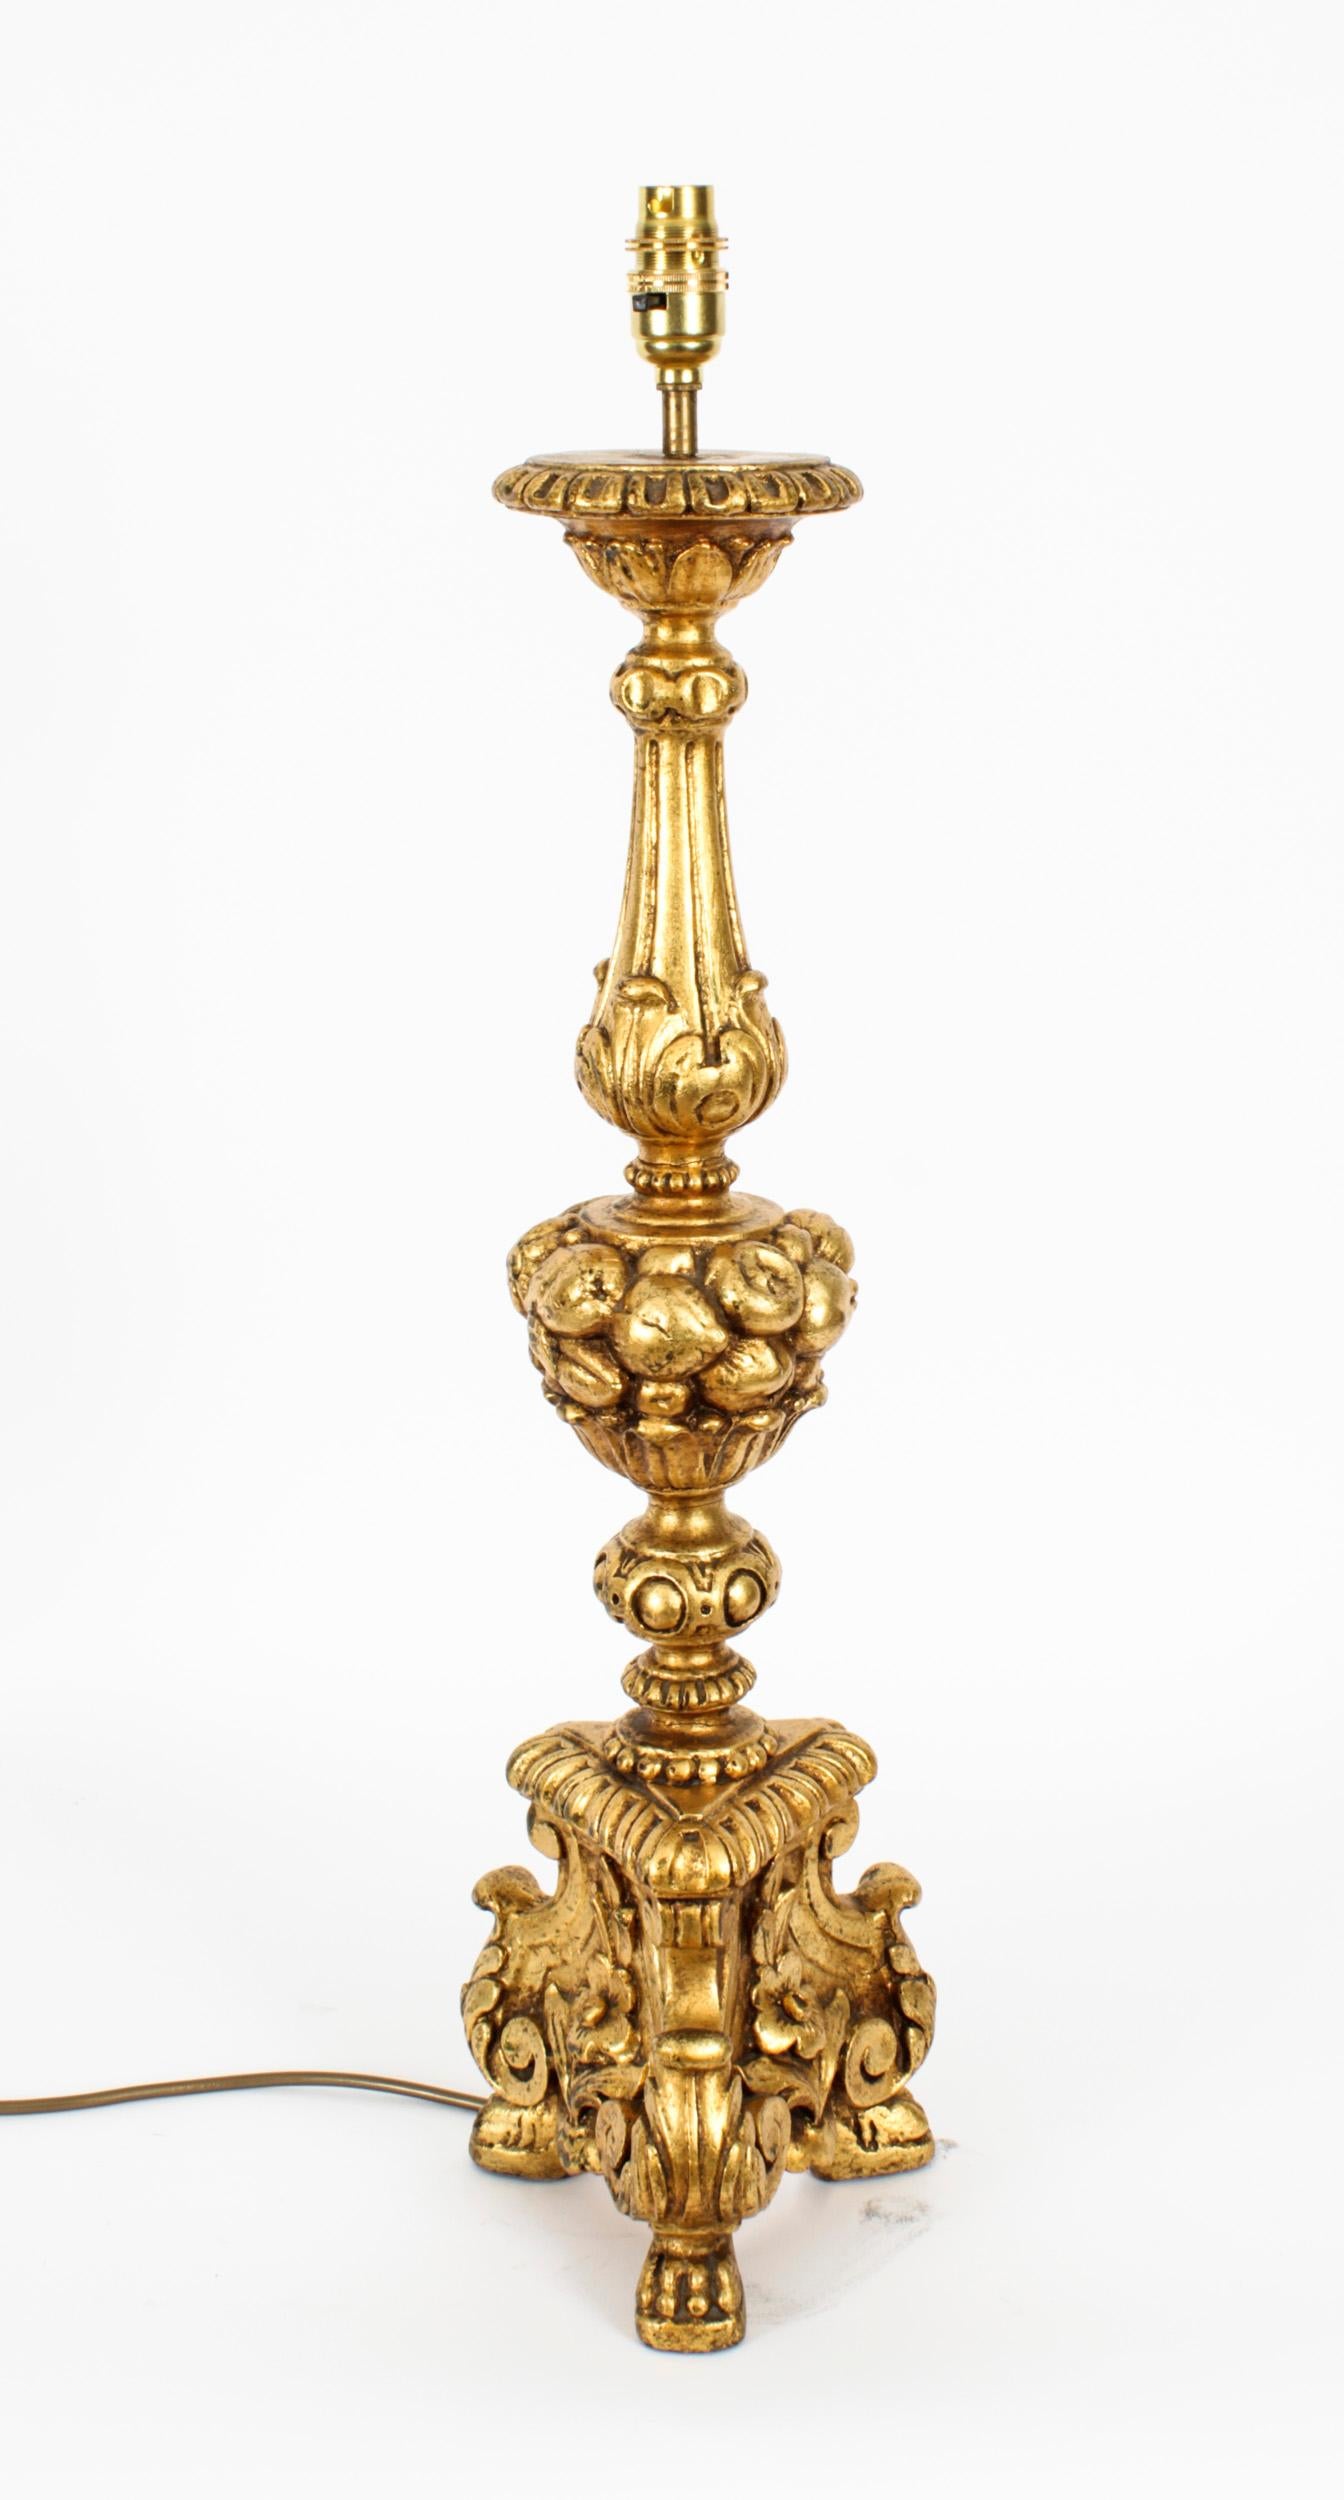 This is a splendid and large vintage Italian gilded Baroque table lamp, mid 20th century in date.
 
This opulent table lamp features candle head with a stem decorated with classical ornate foliage in the form of splendid acanthus leaves and fruit